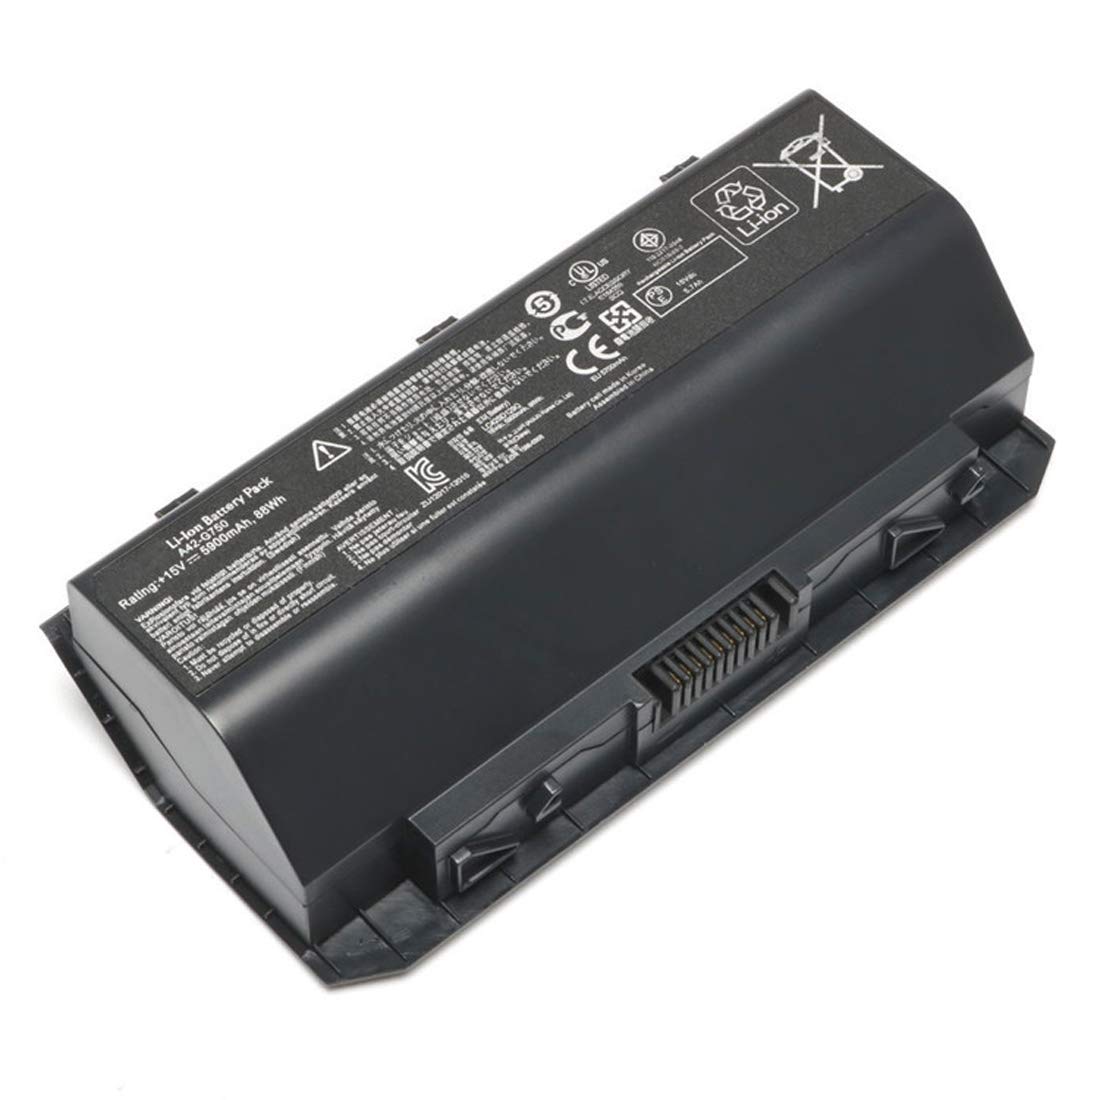 A42-G750 Battery, Asus A42-G750 Replacement Laptop Battery